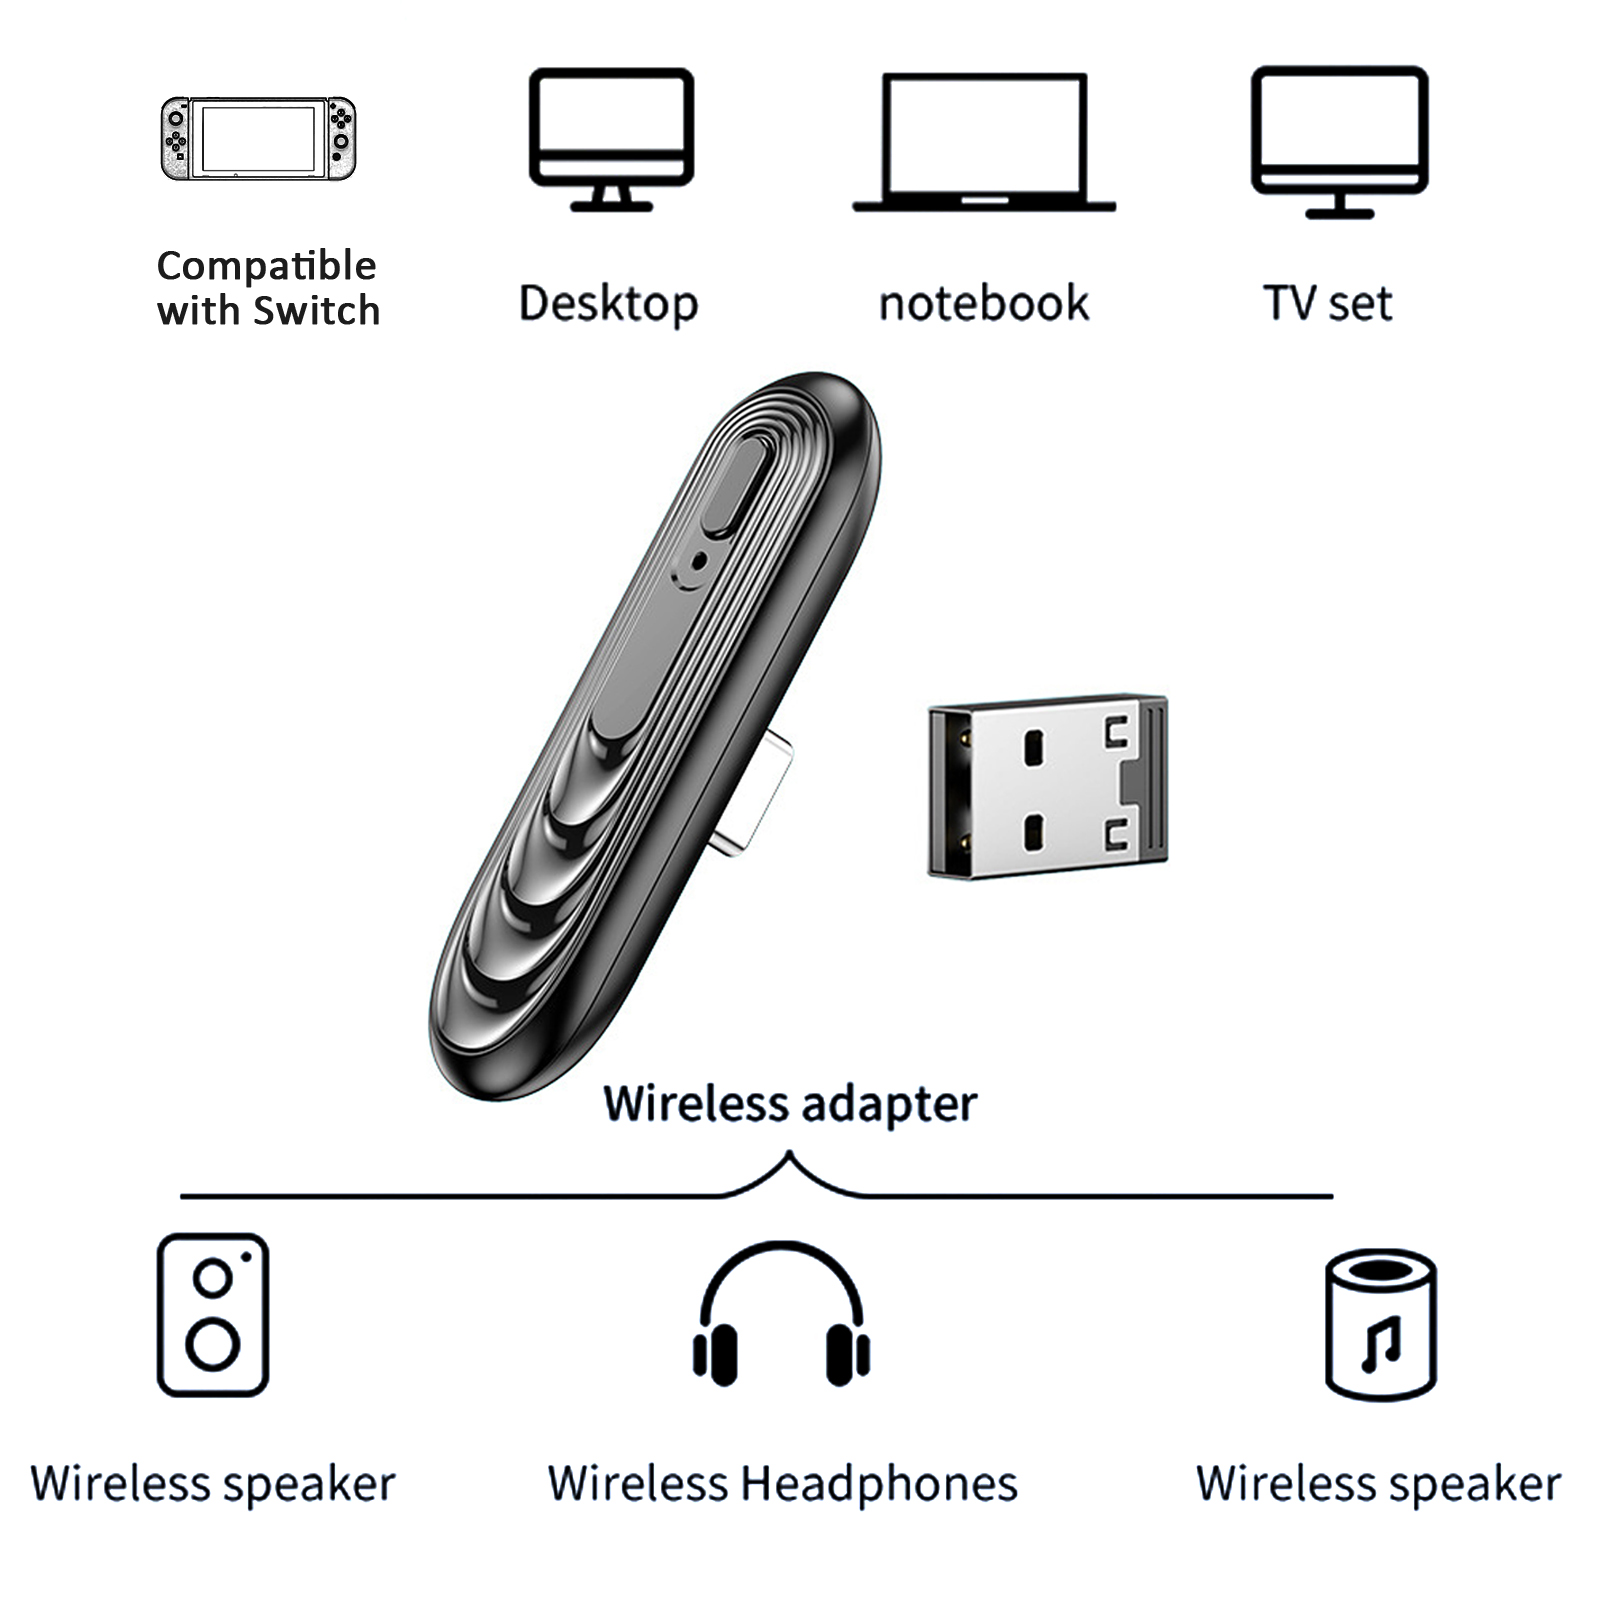 Bakeey-Type-C-bluetooth-50-Audio-Transmitter-Wireless-Adapter-with-USB-Converter-Compatible-with-Swi-1791283-2